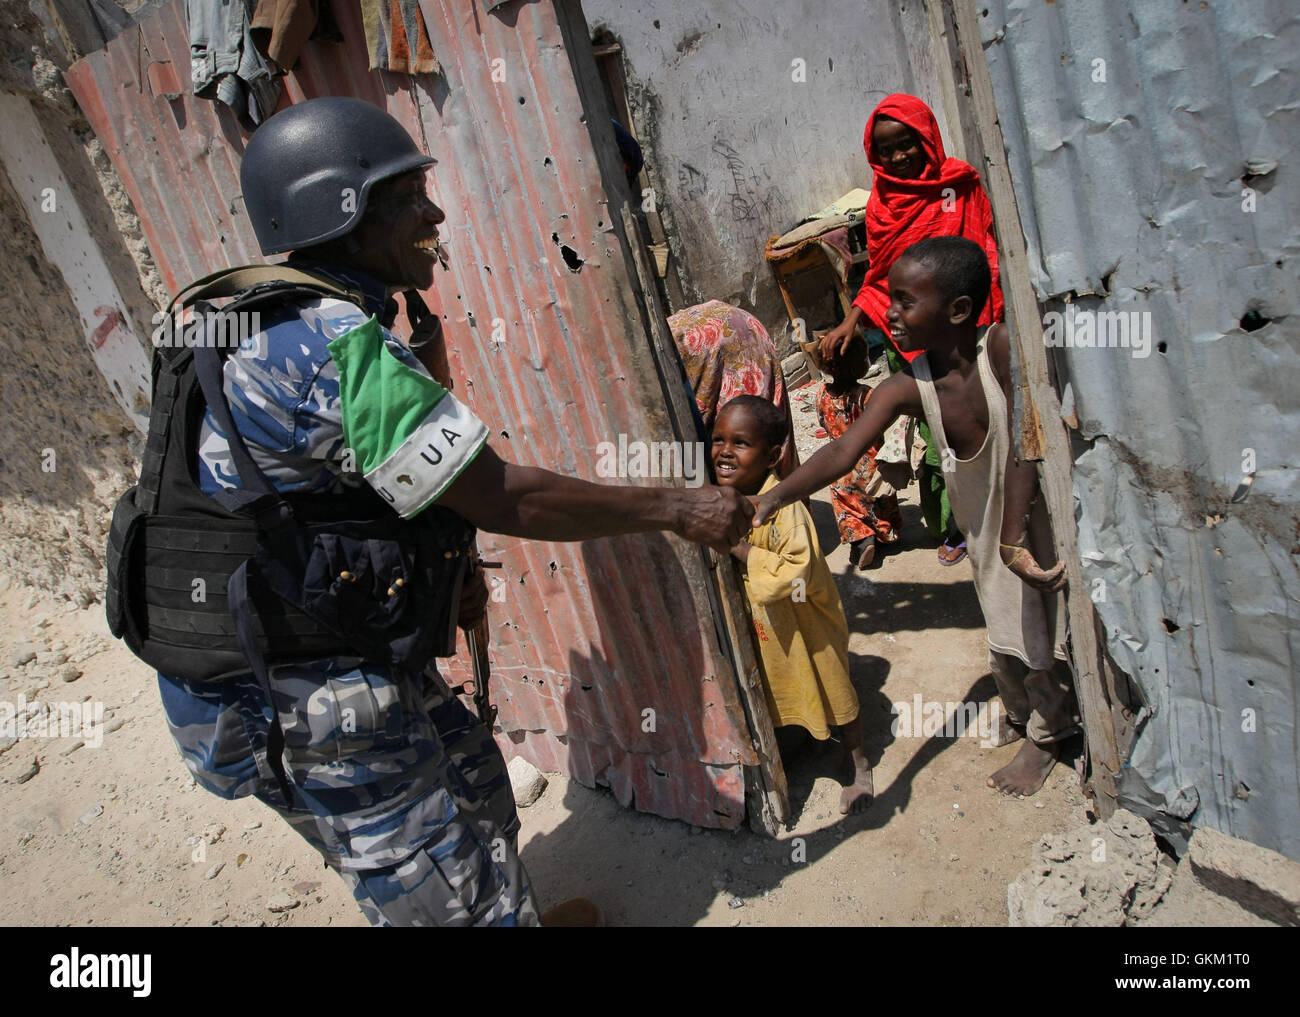 SOMALIA, Mogadishu: In a handout photo taken and released by the African Union-United Nations Information Support Team 09 November, a Ugandan police officer serving as part of a Formed Police Unit (FPU) with the African Union Union Mission in Somalia (AMISOM) shakes hands with a young Somali boy during a foot patrol in the Kaa'ran district of the Somali capital Mogadishu. AMISOM's FPUs are working with their counterparts in the Somali Police Force (SPF) in helping to provide security in Mogadishu in addition to training and mentoring the SPF on policing techniques and practises. AU-UN IST PHOT Stock Photo